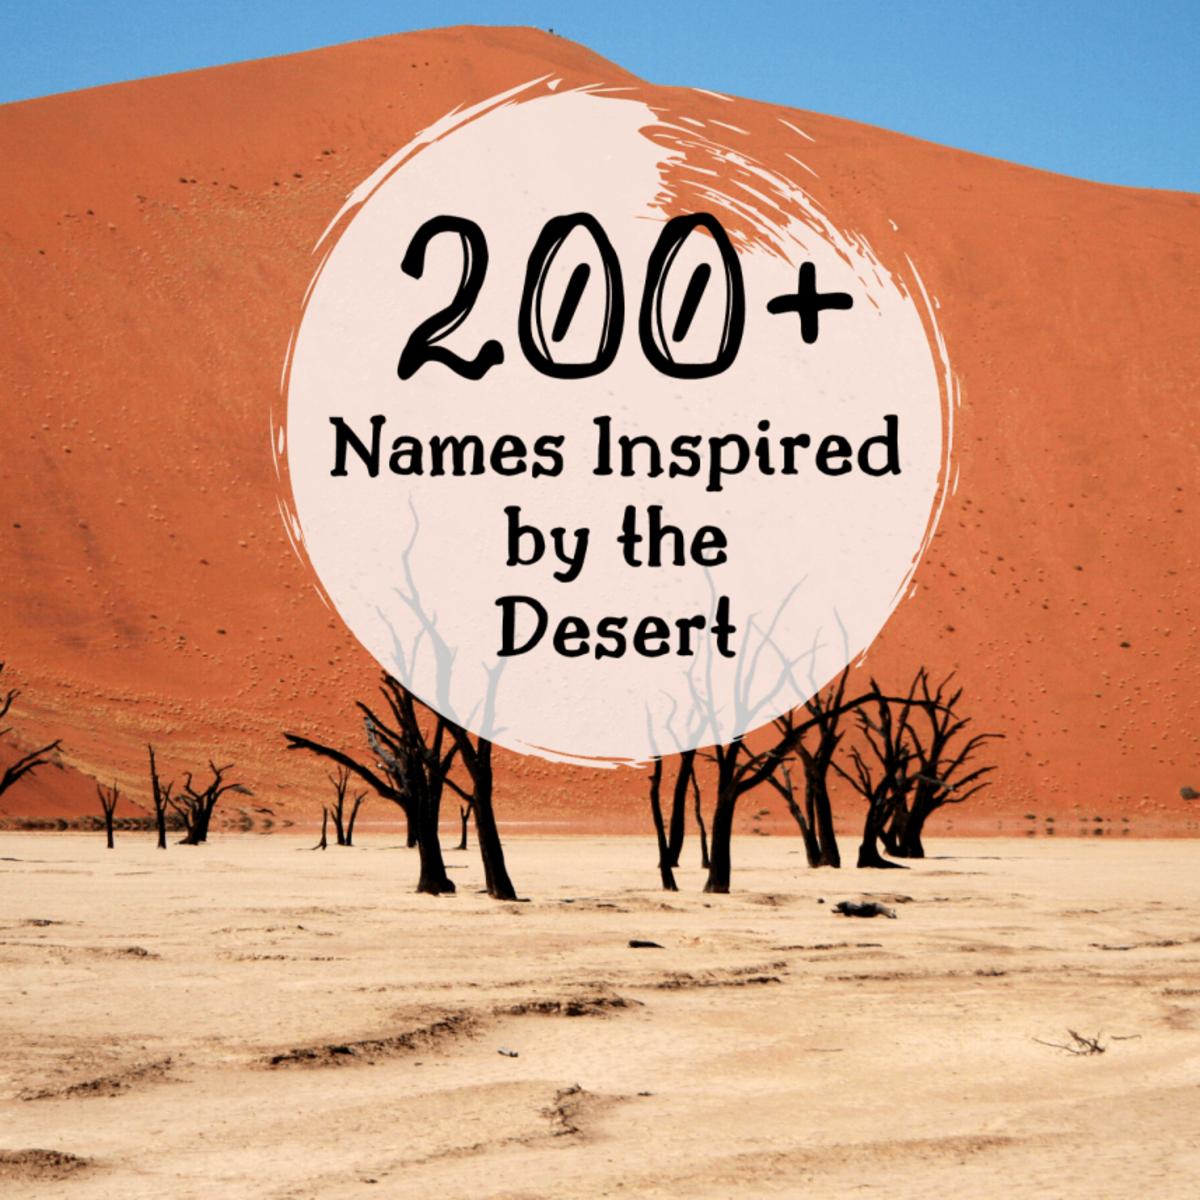 A list of names inspired by the deserts of the world.